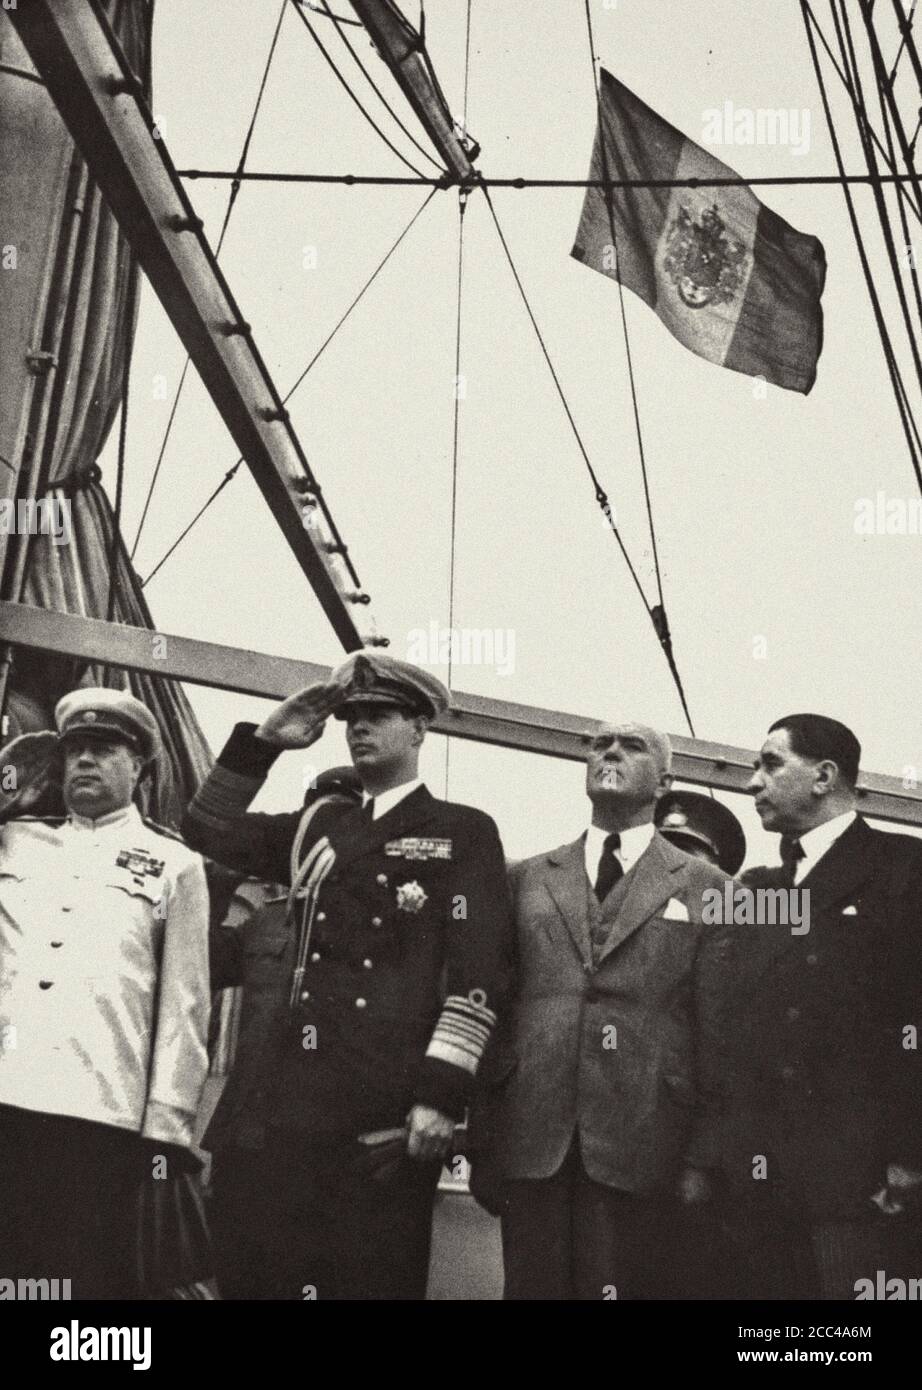 King of Romania Mihai I with marshal of the Soviet Union Fedor Tolbukhin on the deck of the ship. Romania. 1945 Stock Photo